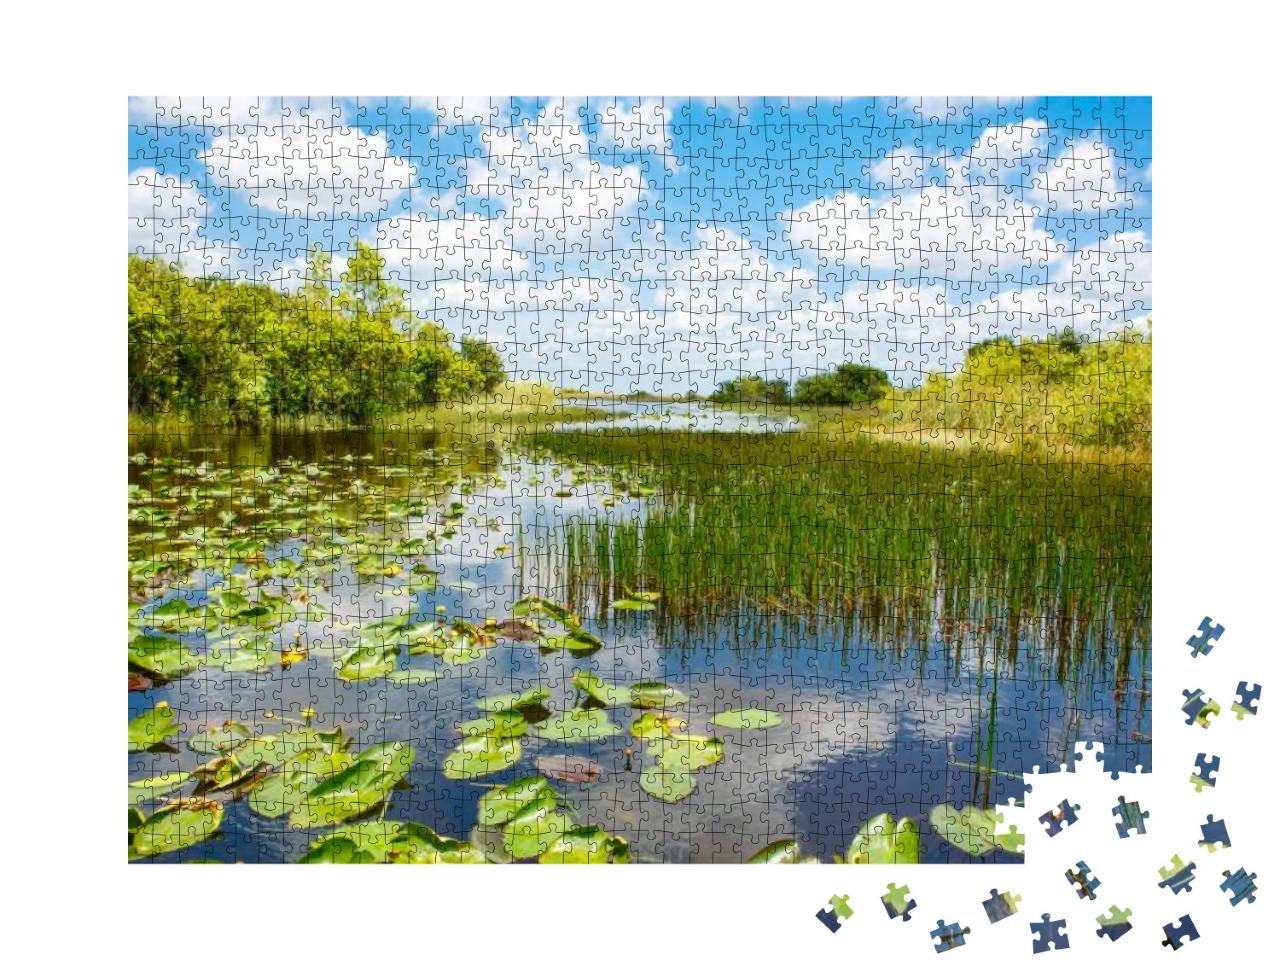 Florida Wetland, Airboat Ride At Everglades National Park... Jigsaw Puzzle with 1000 pieces